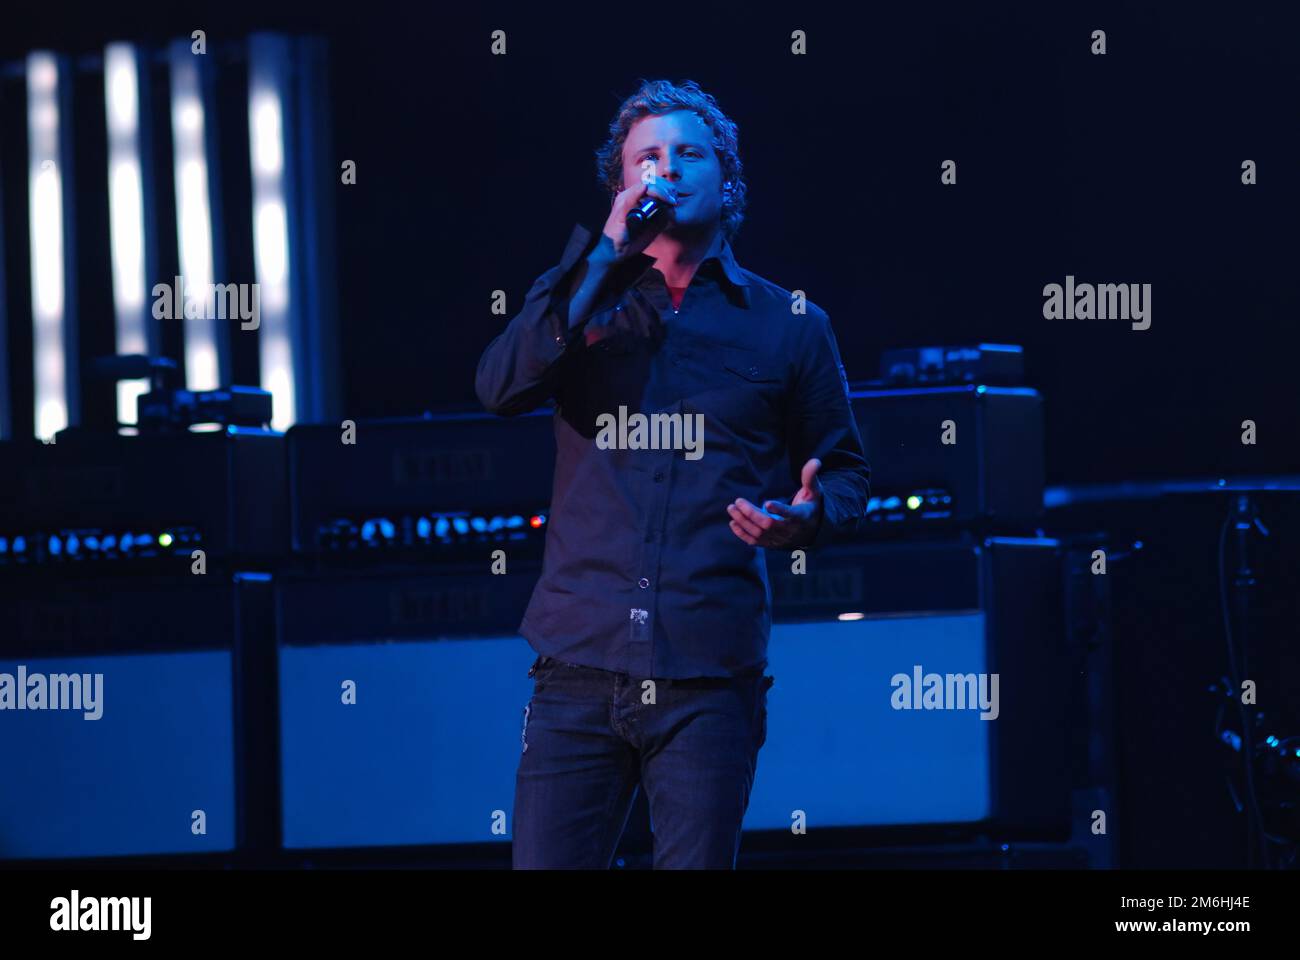 Country music star Dierks Bentley performing before a live audience at the University of Florida on 2/14/2008. Credit: Bill Ragan/Alamy Live News Stock Photo